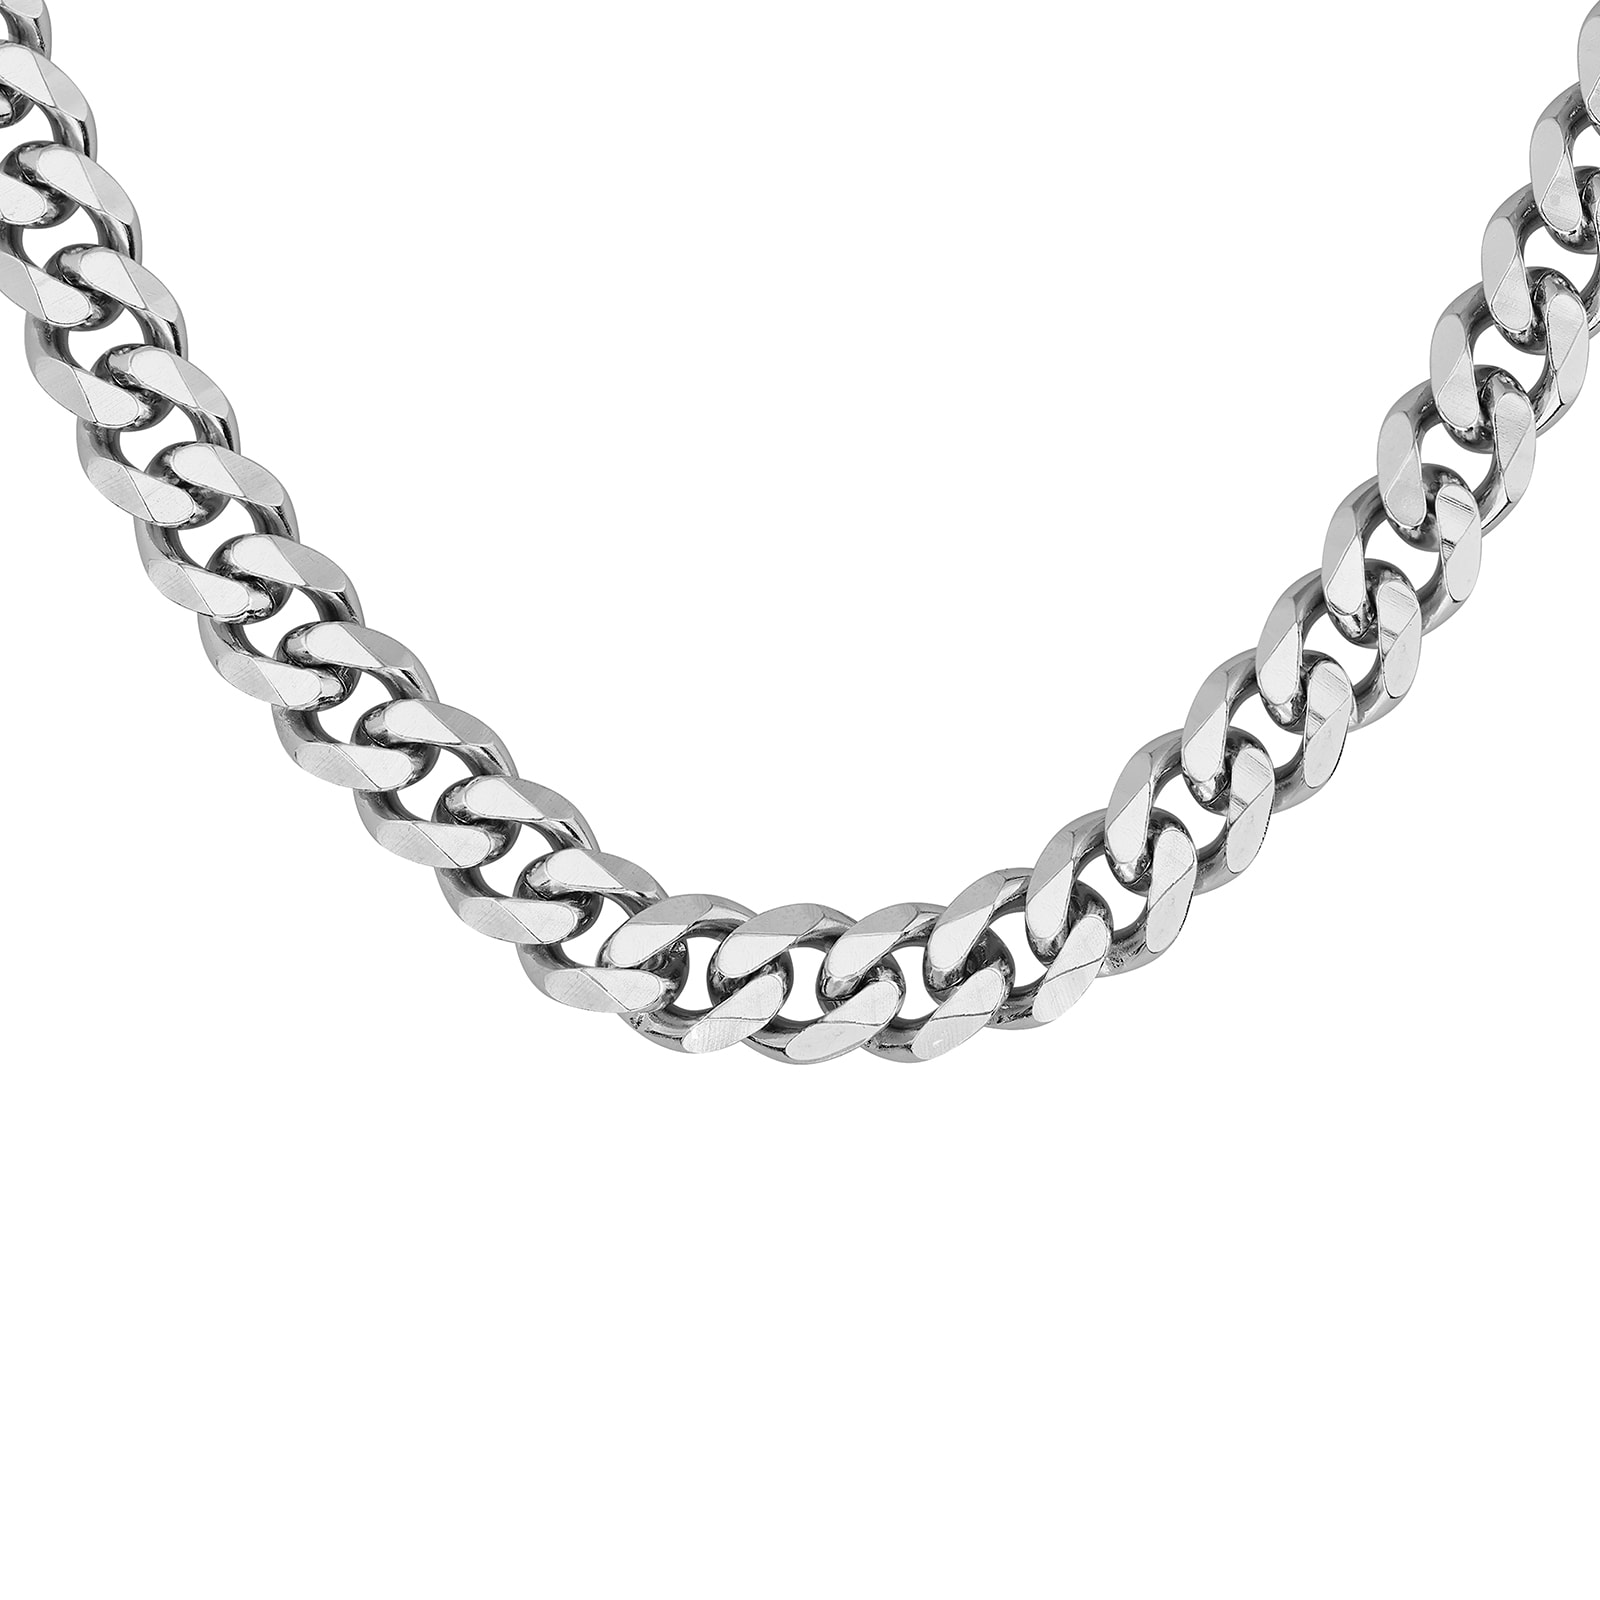 Solid Curb Link Necklace Sterling Silver 24